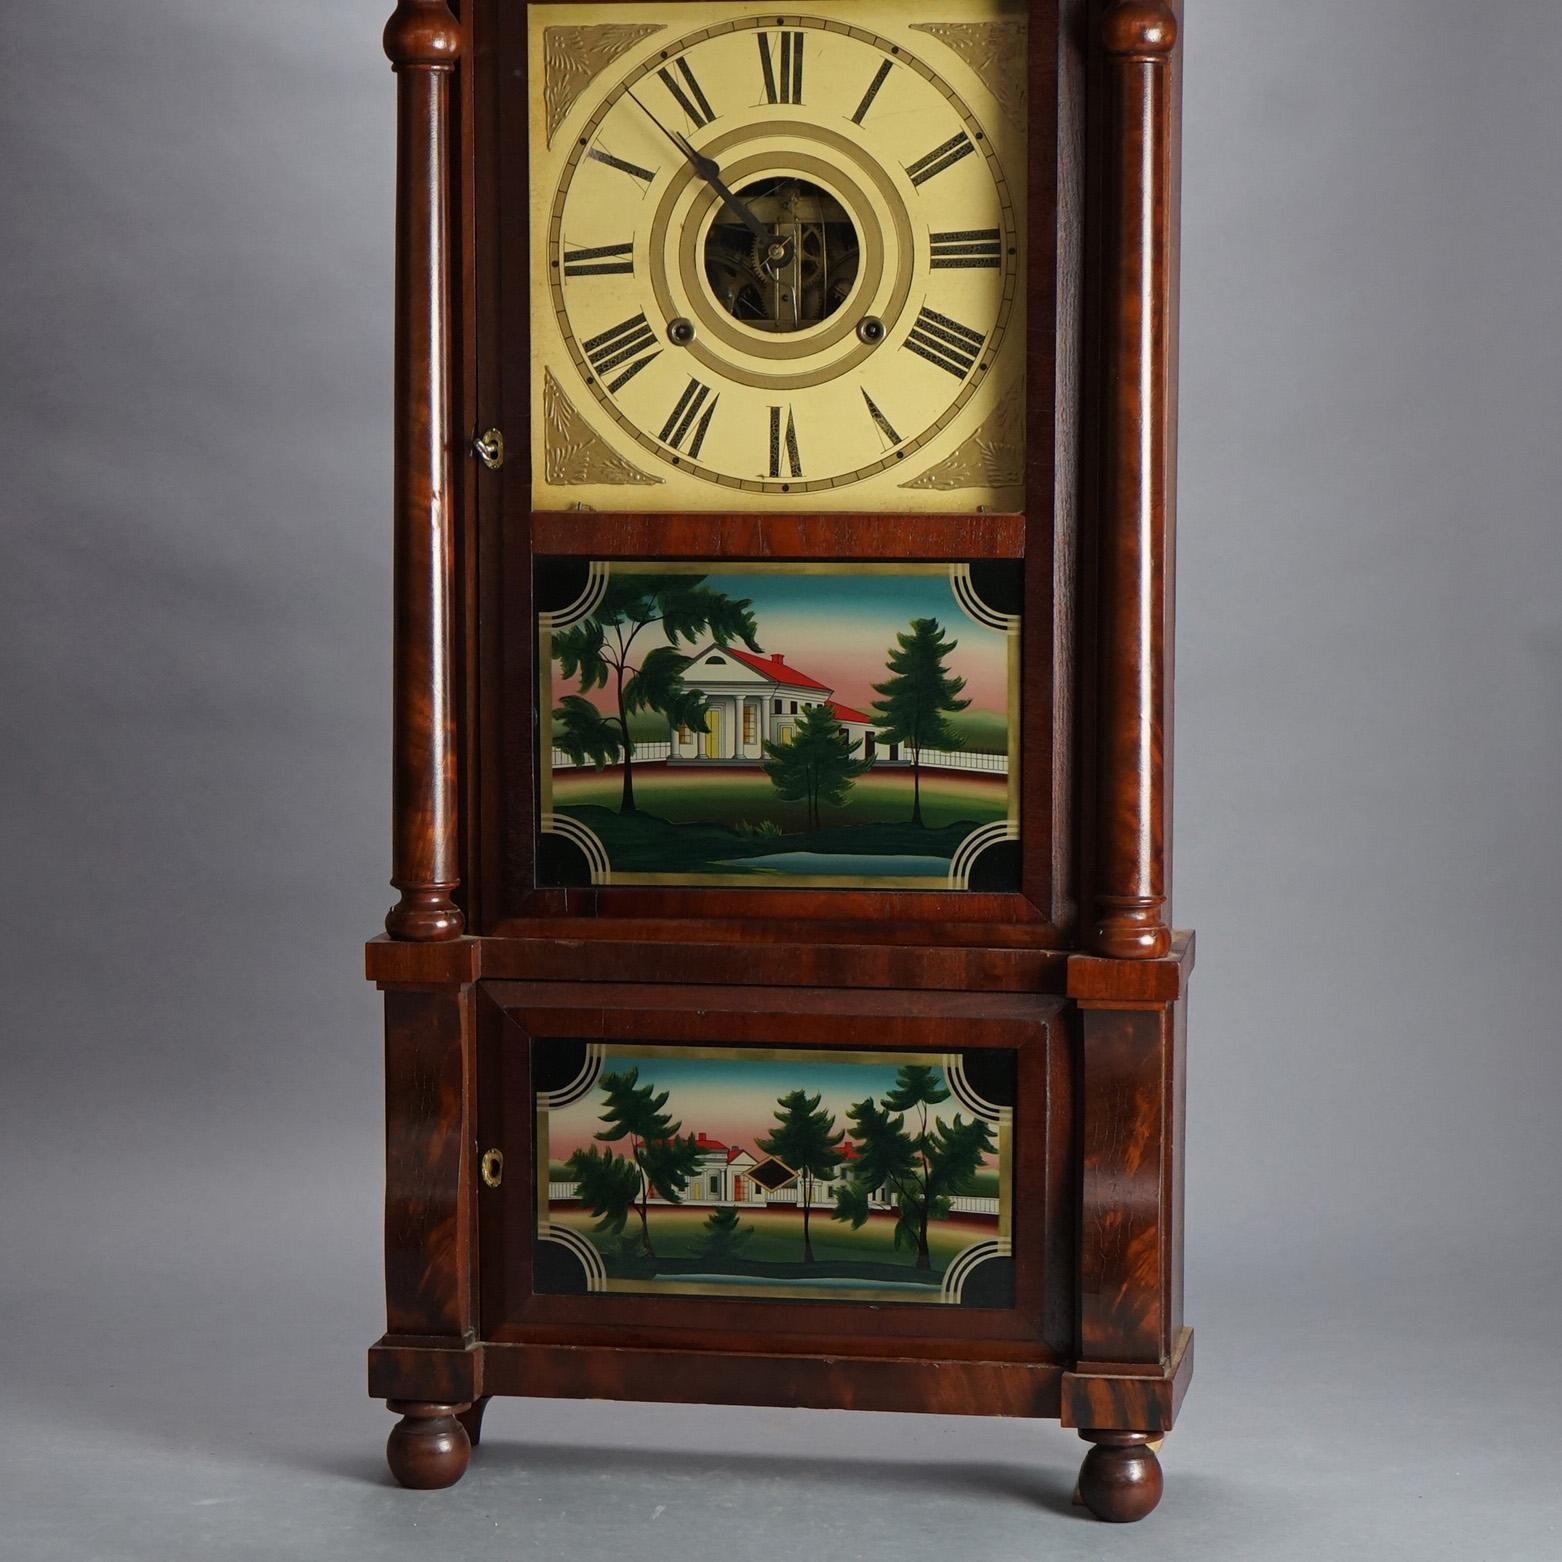 Antique Birge and Mallory American Empire Flame Mahogany Open Escapement Mantle Clock with Foliate Carved Crest, Flanking Columns and Eglomise Panels having Structures, C1840

Measures - 38.75